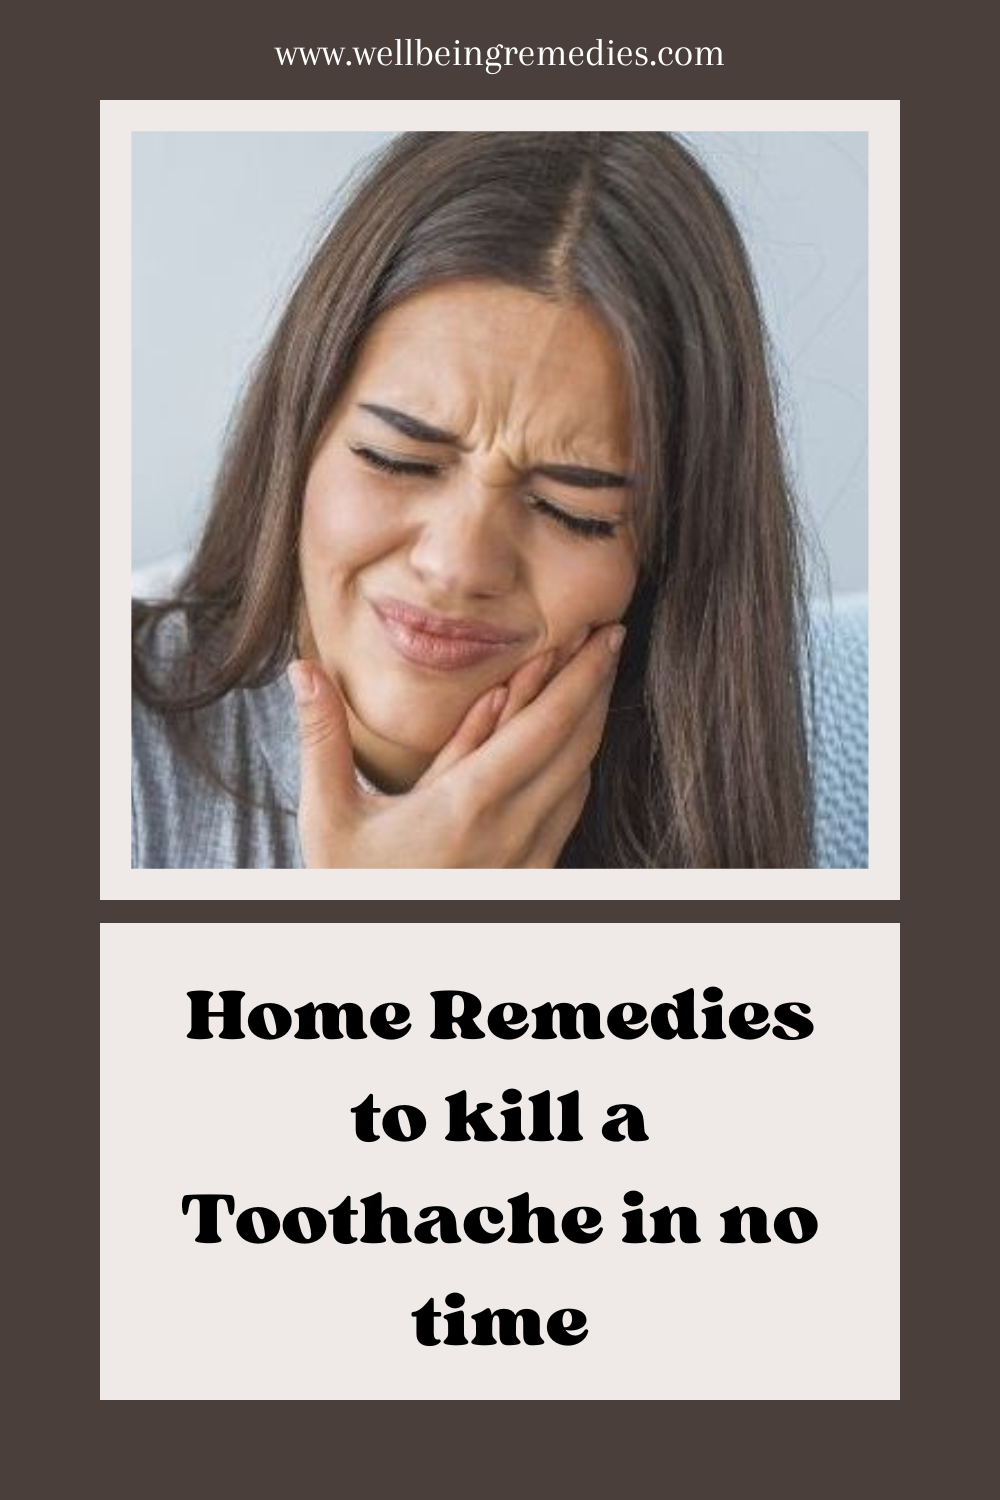 Home Remedies to kill a Toothache in no time